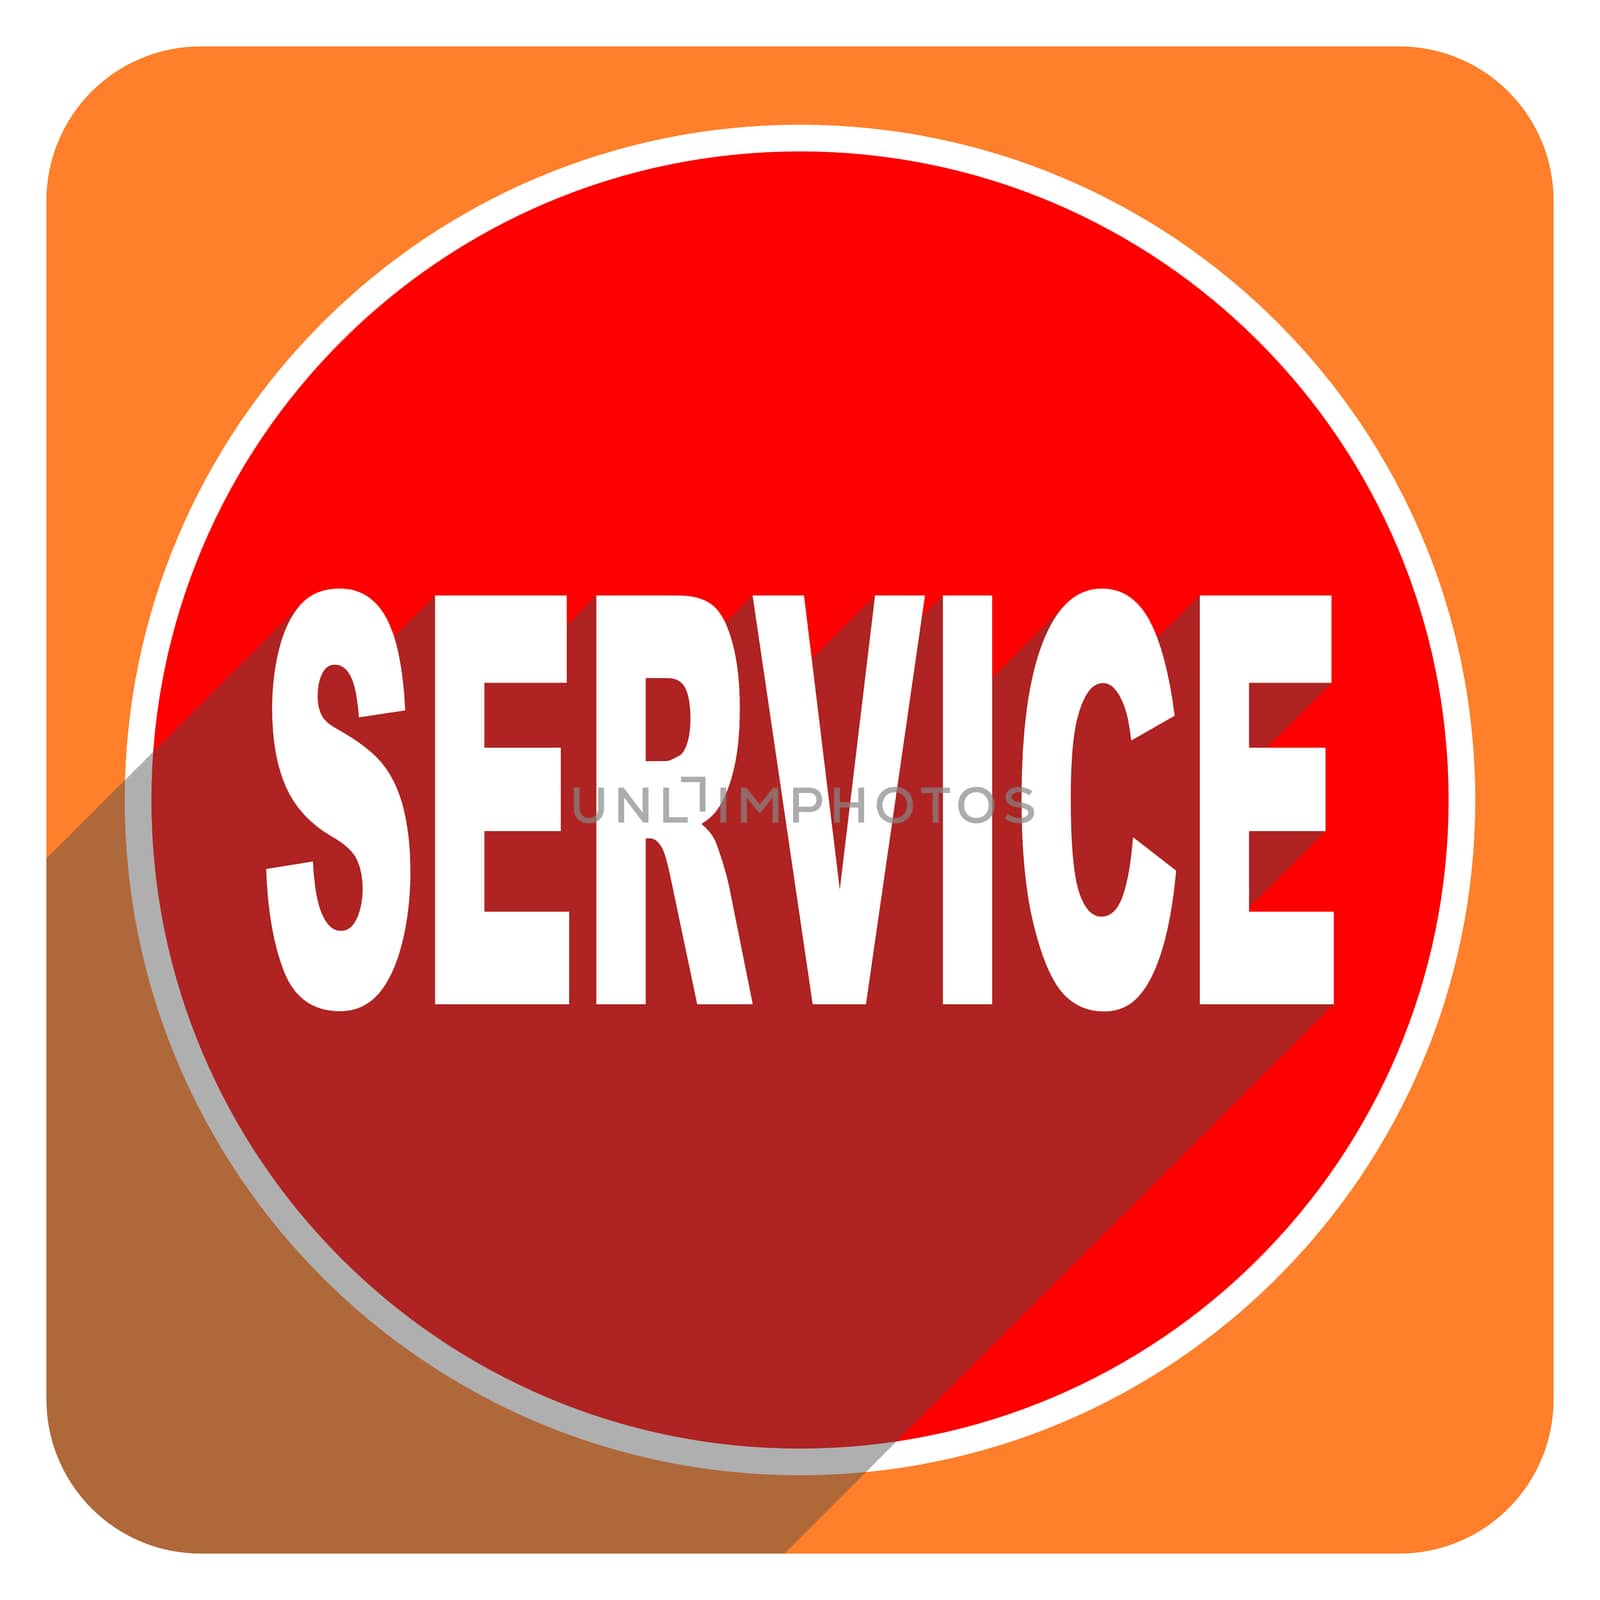 service red flat icon isolated